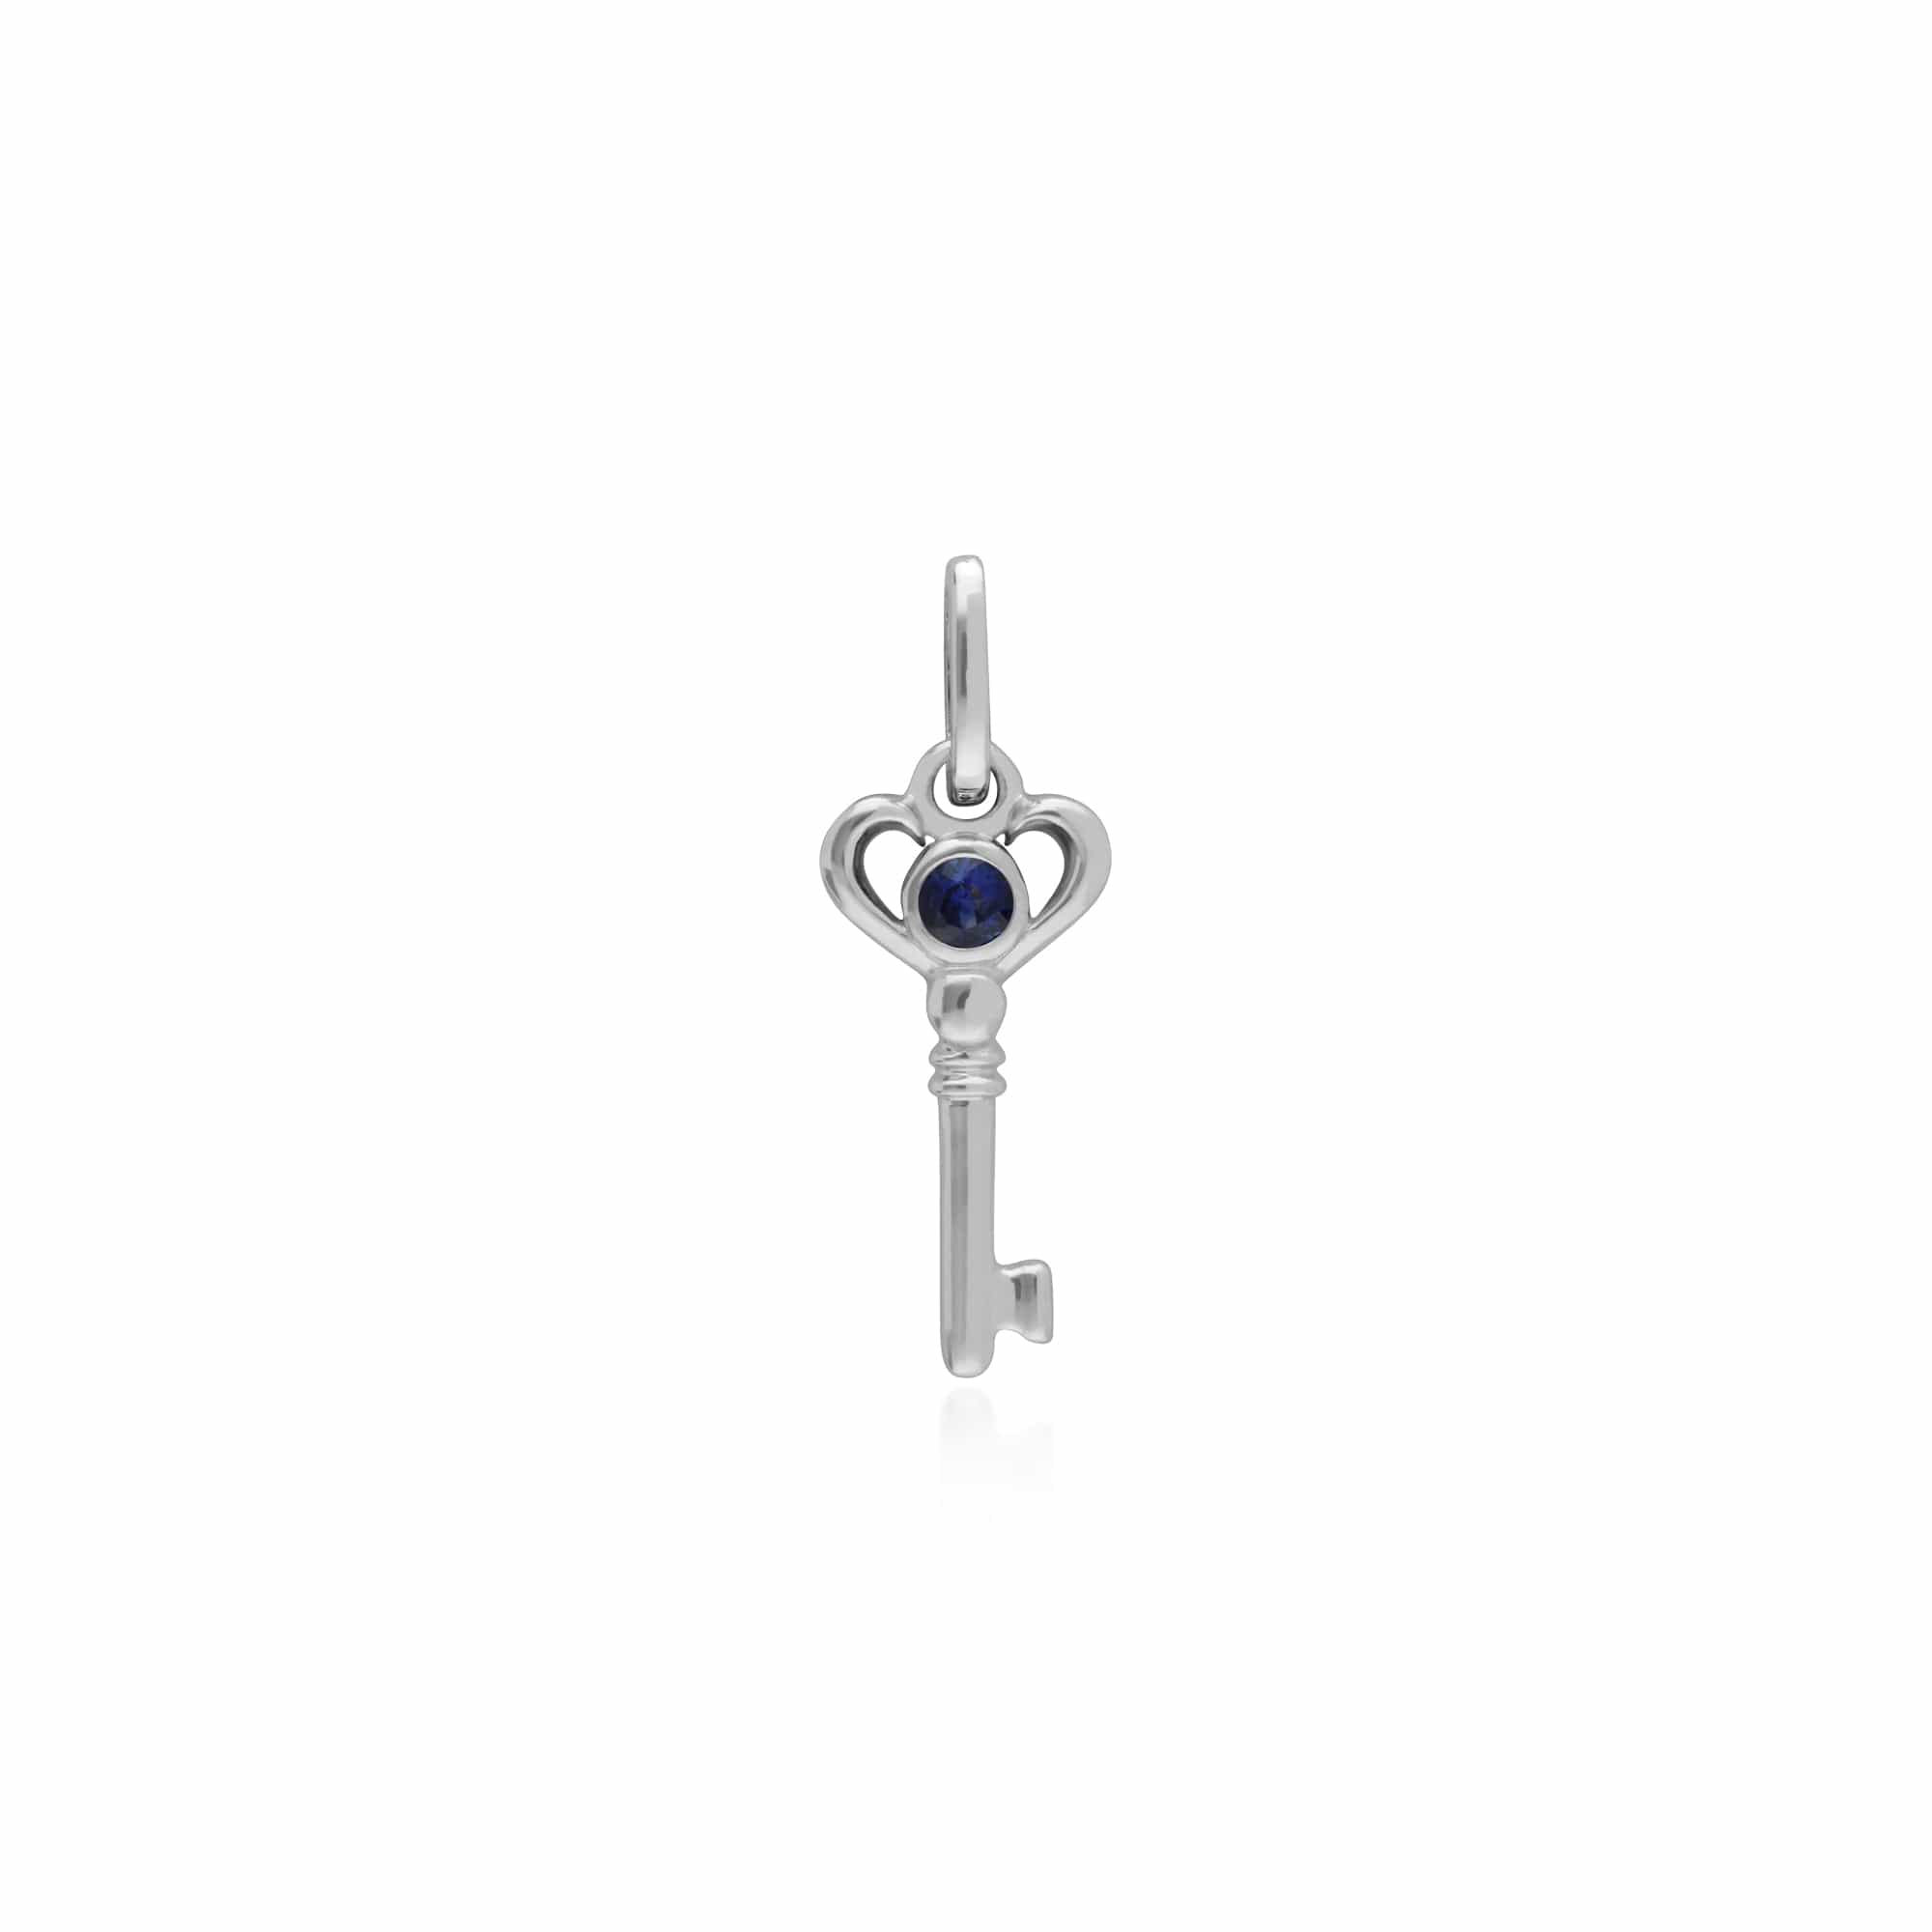 270P026403925-270P027001925 Classic Heart Lock Pendant & Sapphire Key Charm in 925 Sterling Silver 2